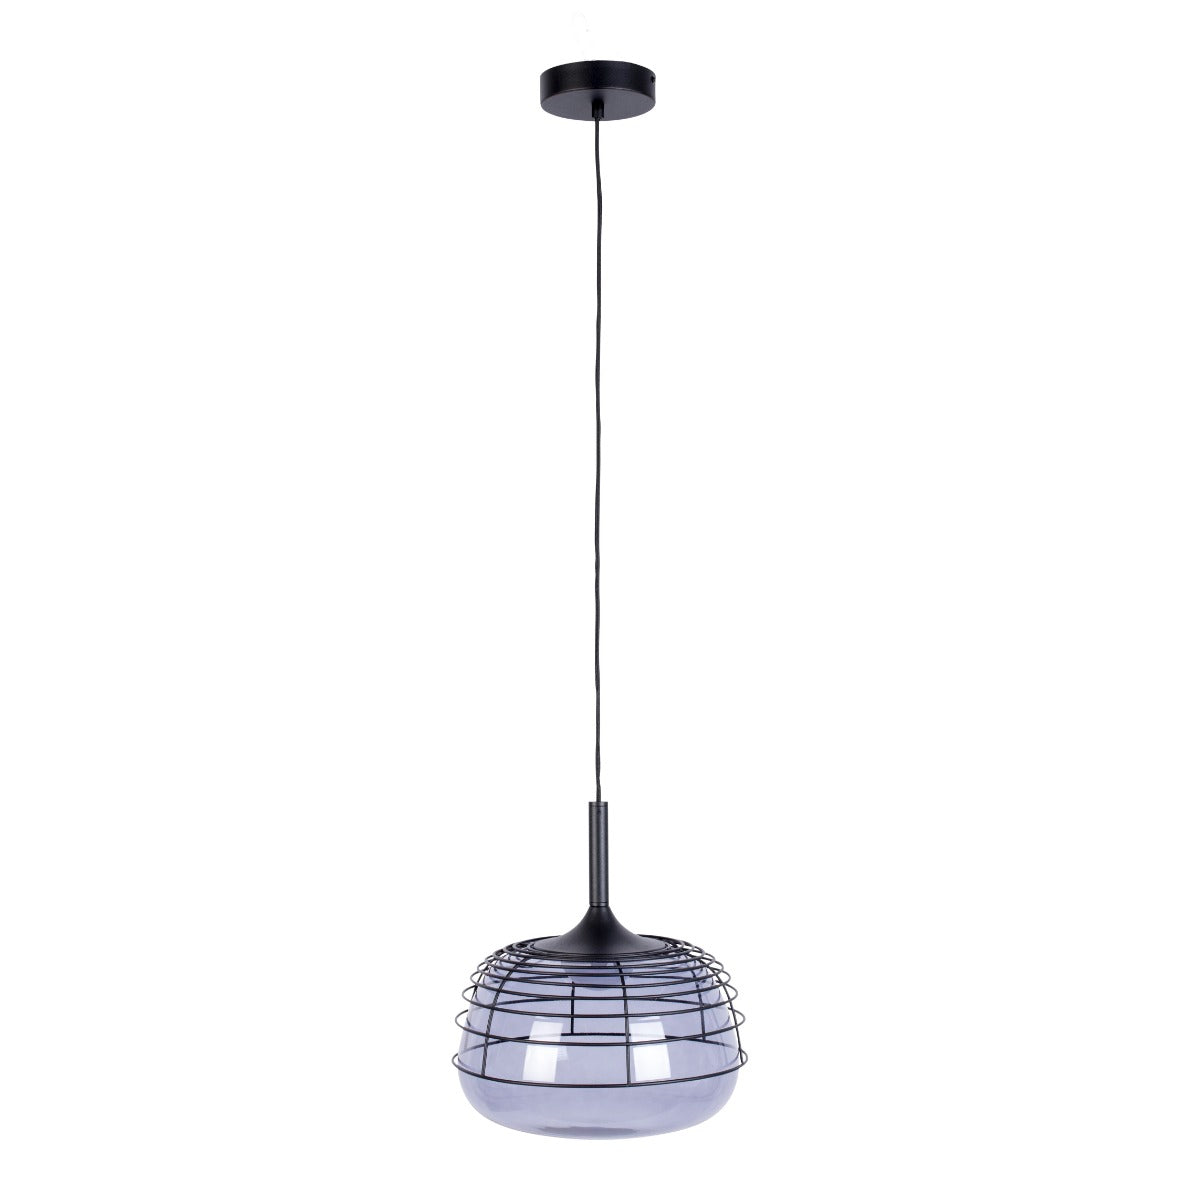 The SMOKEY lamp is a combination of a class with practicality in the best edition. The elegant metal base of the tripod maintains a glass shade that illuminates the room like a rising and setting sun. The simplicity of its implementation fits perfectly with a modern living room that needs some light. Hanging it in a Scandinavian bedroom, a effect of coziness and romanticity is obtained.